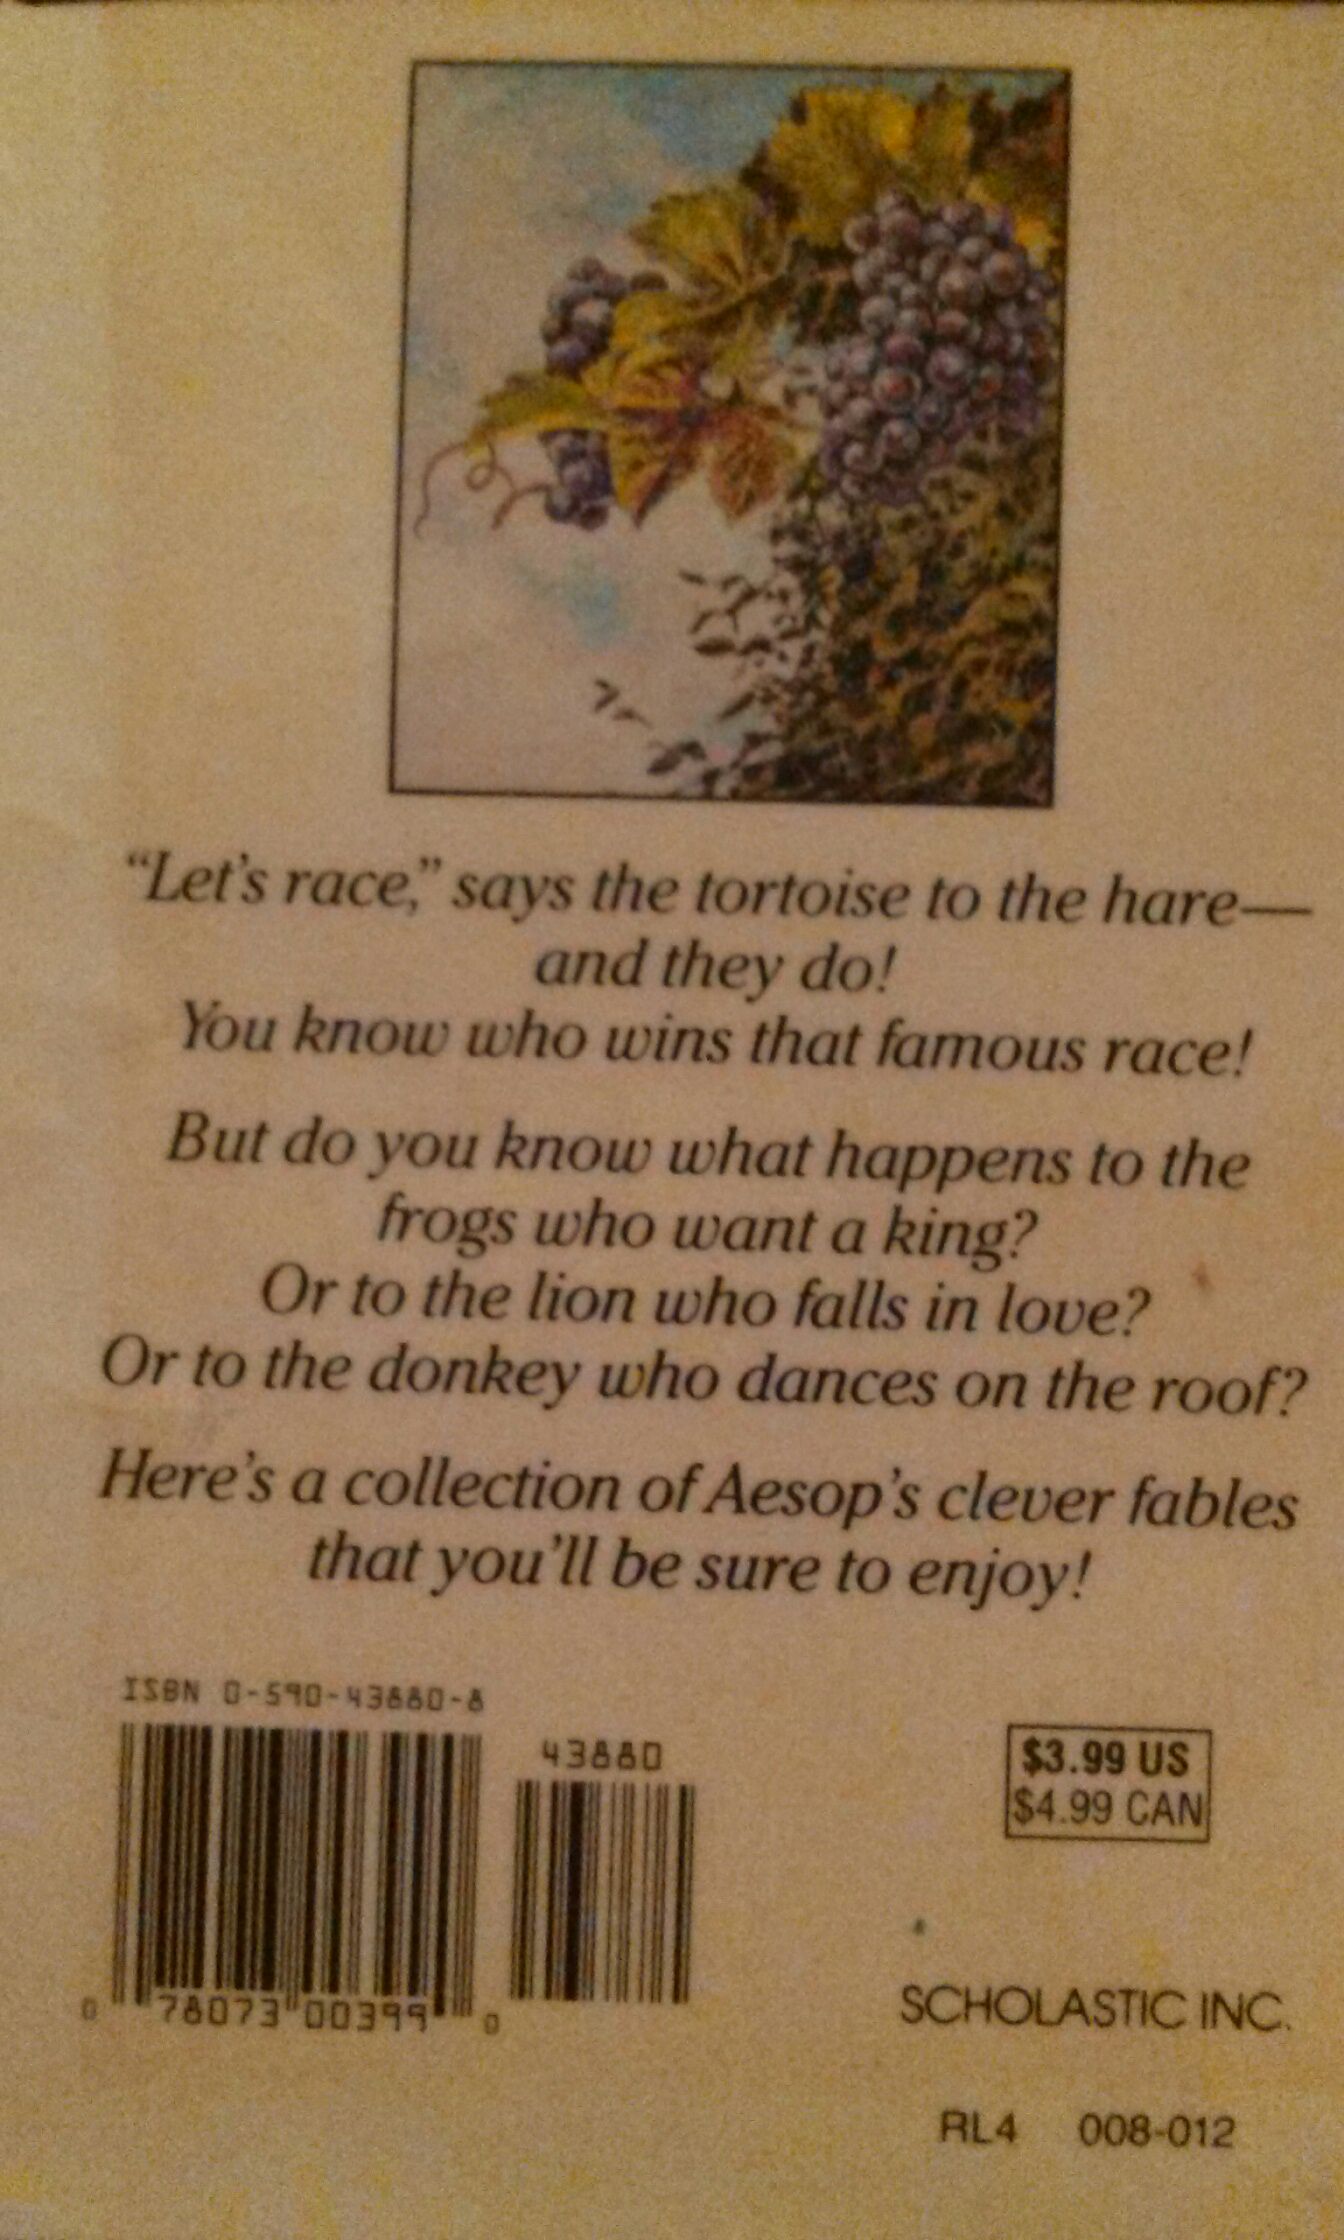 Aesop’s Fables - Malorie Blackman (Scholastic Inc. - Paperback) book collectible [Barcode 9780590438803] - Main Image 2